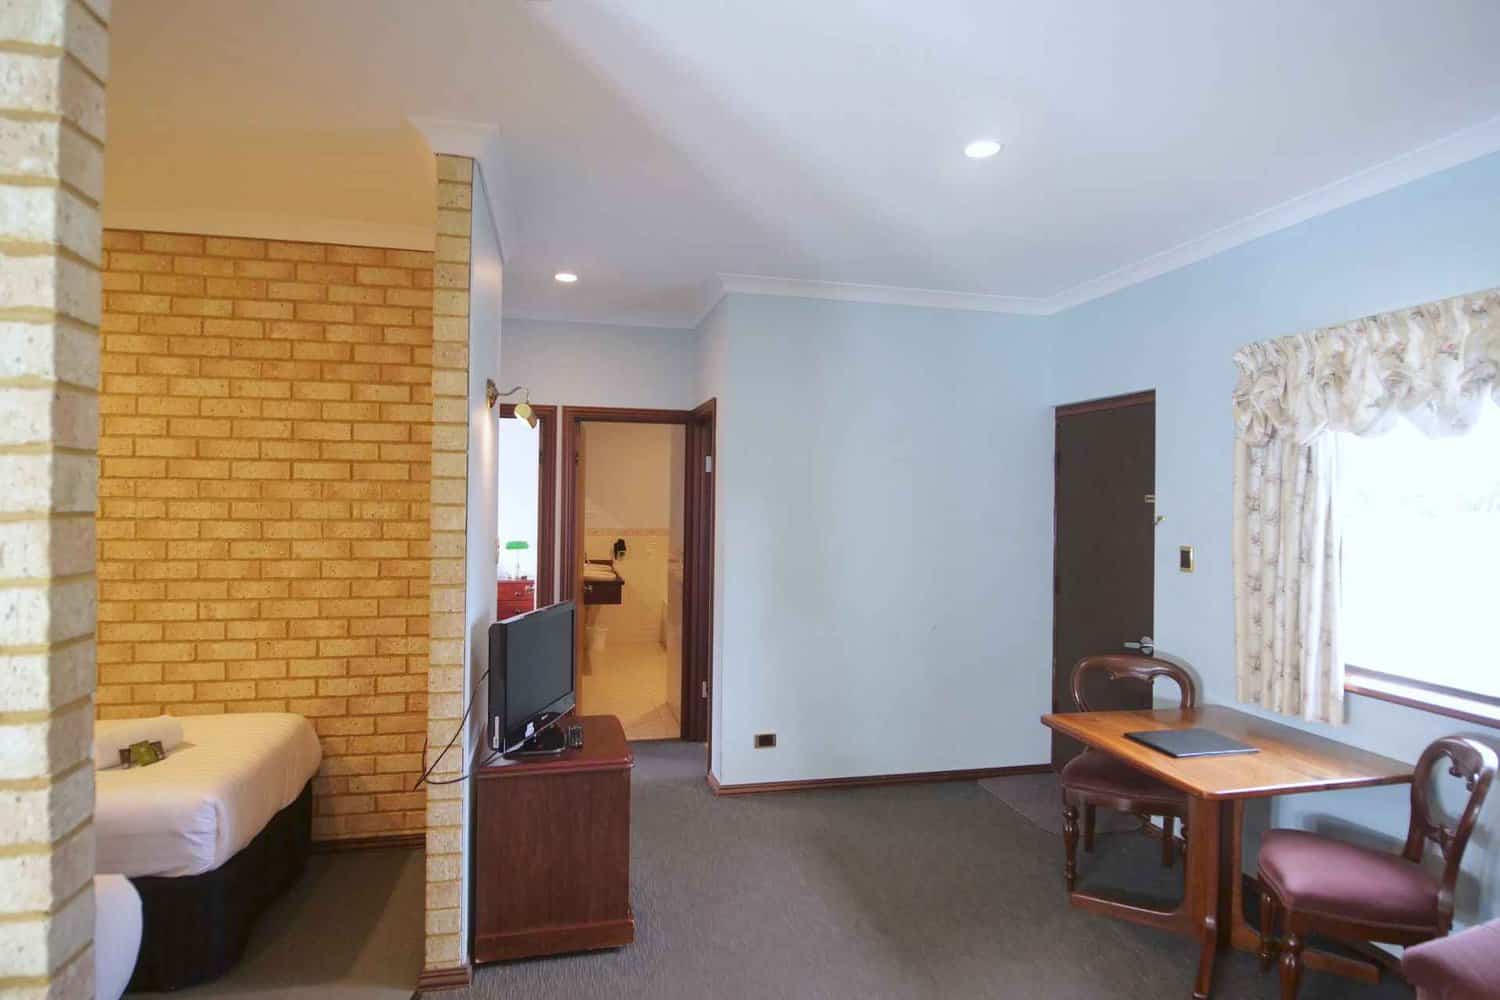 Spacious hotel room with a comfortable bed, work desk, and brick accent wall, inviting guests to choose a hotel room that feels like a home away from home.